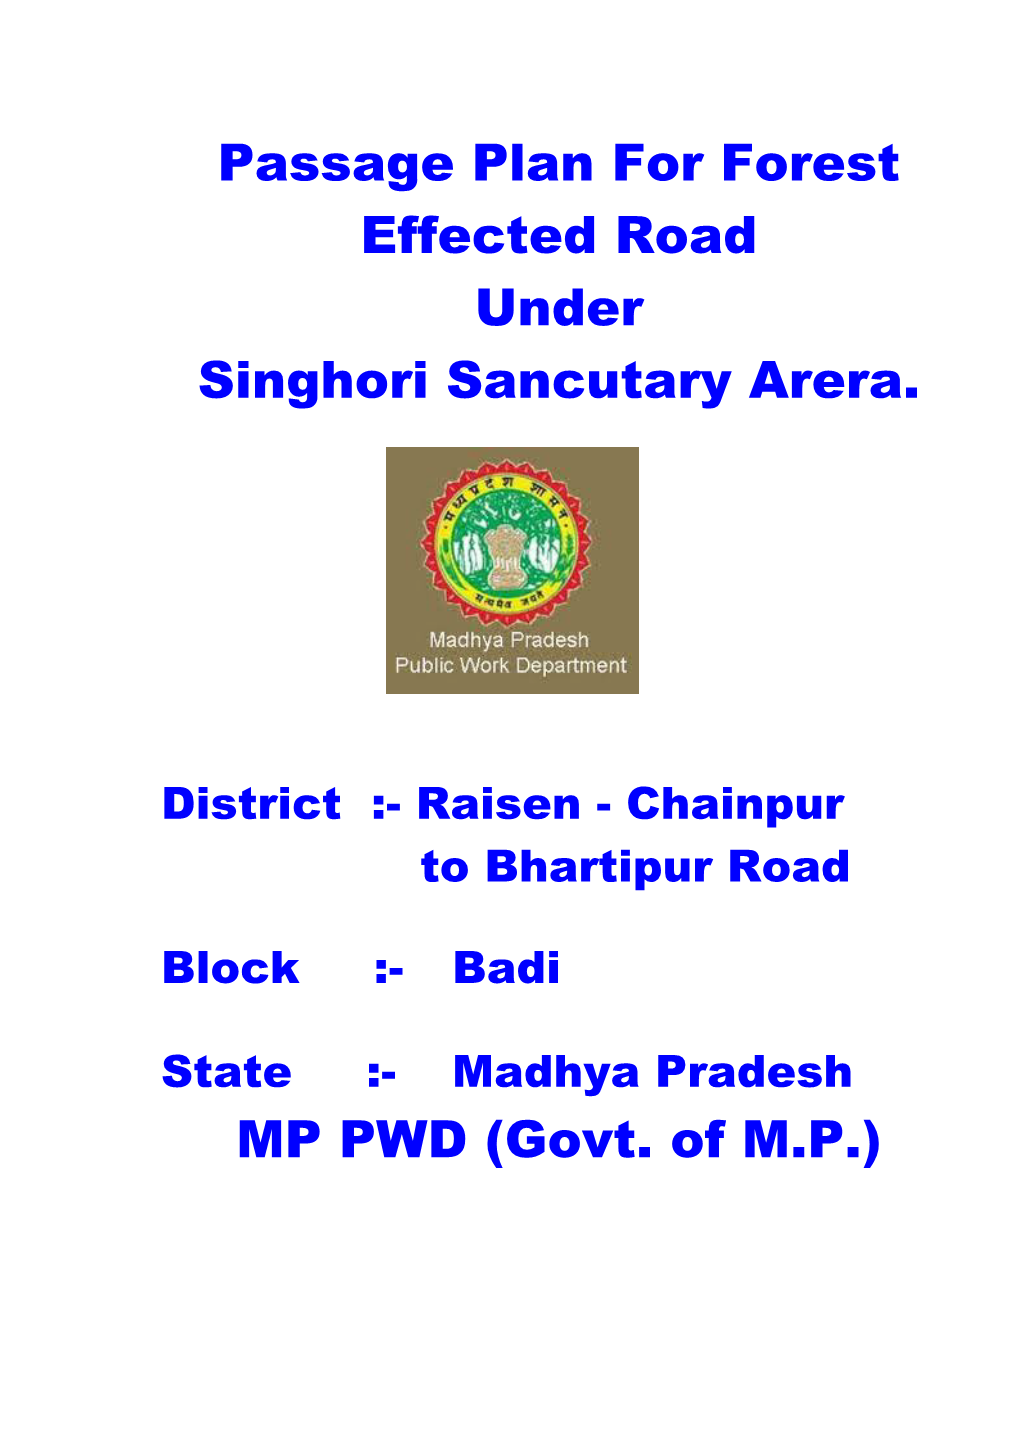 Passage Plan for Forest Effected Road Under Singhori Sancutary Arera